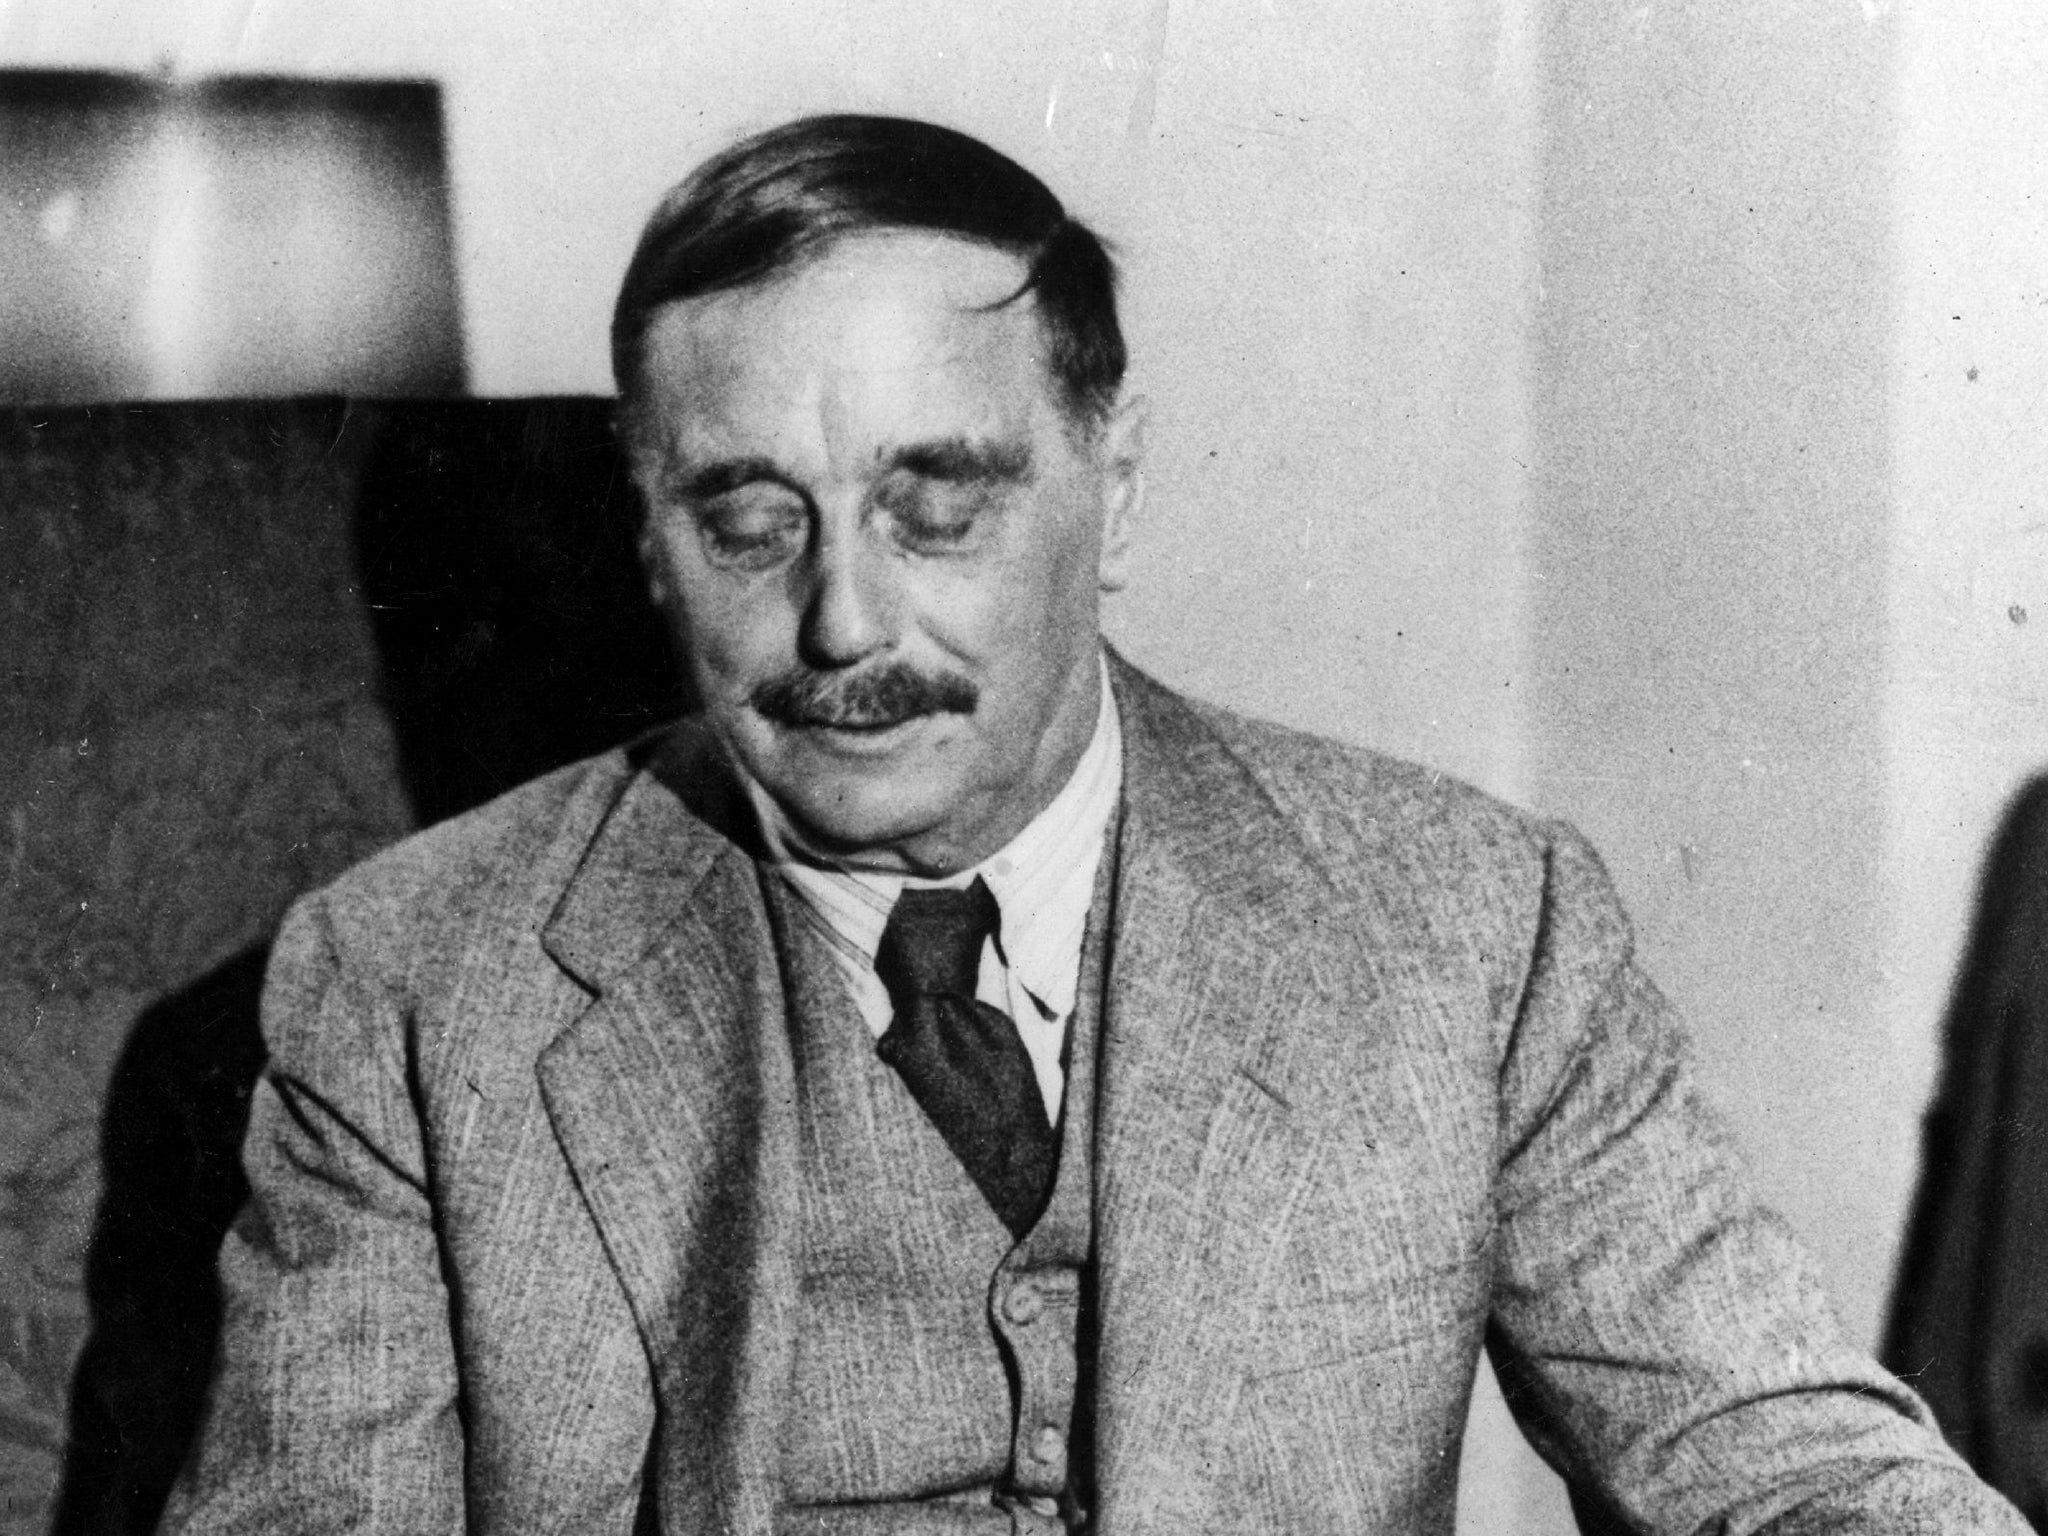 Writer HG Wells wanted to marry Moura but she turned him down